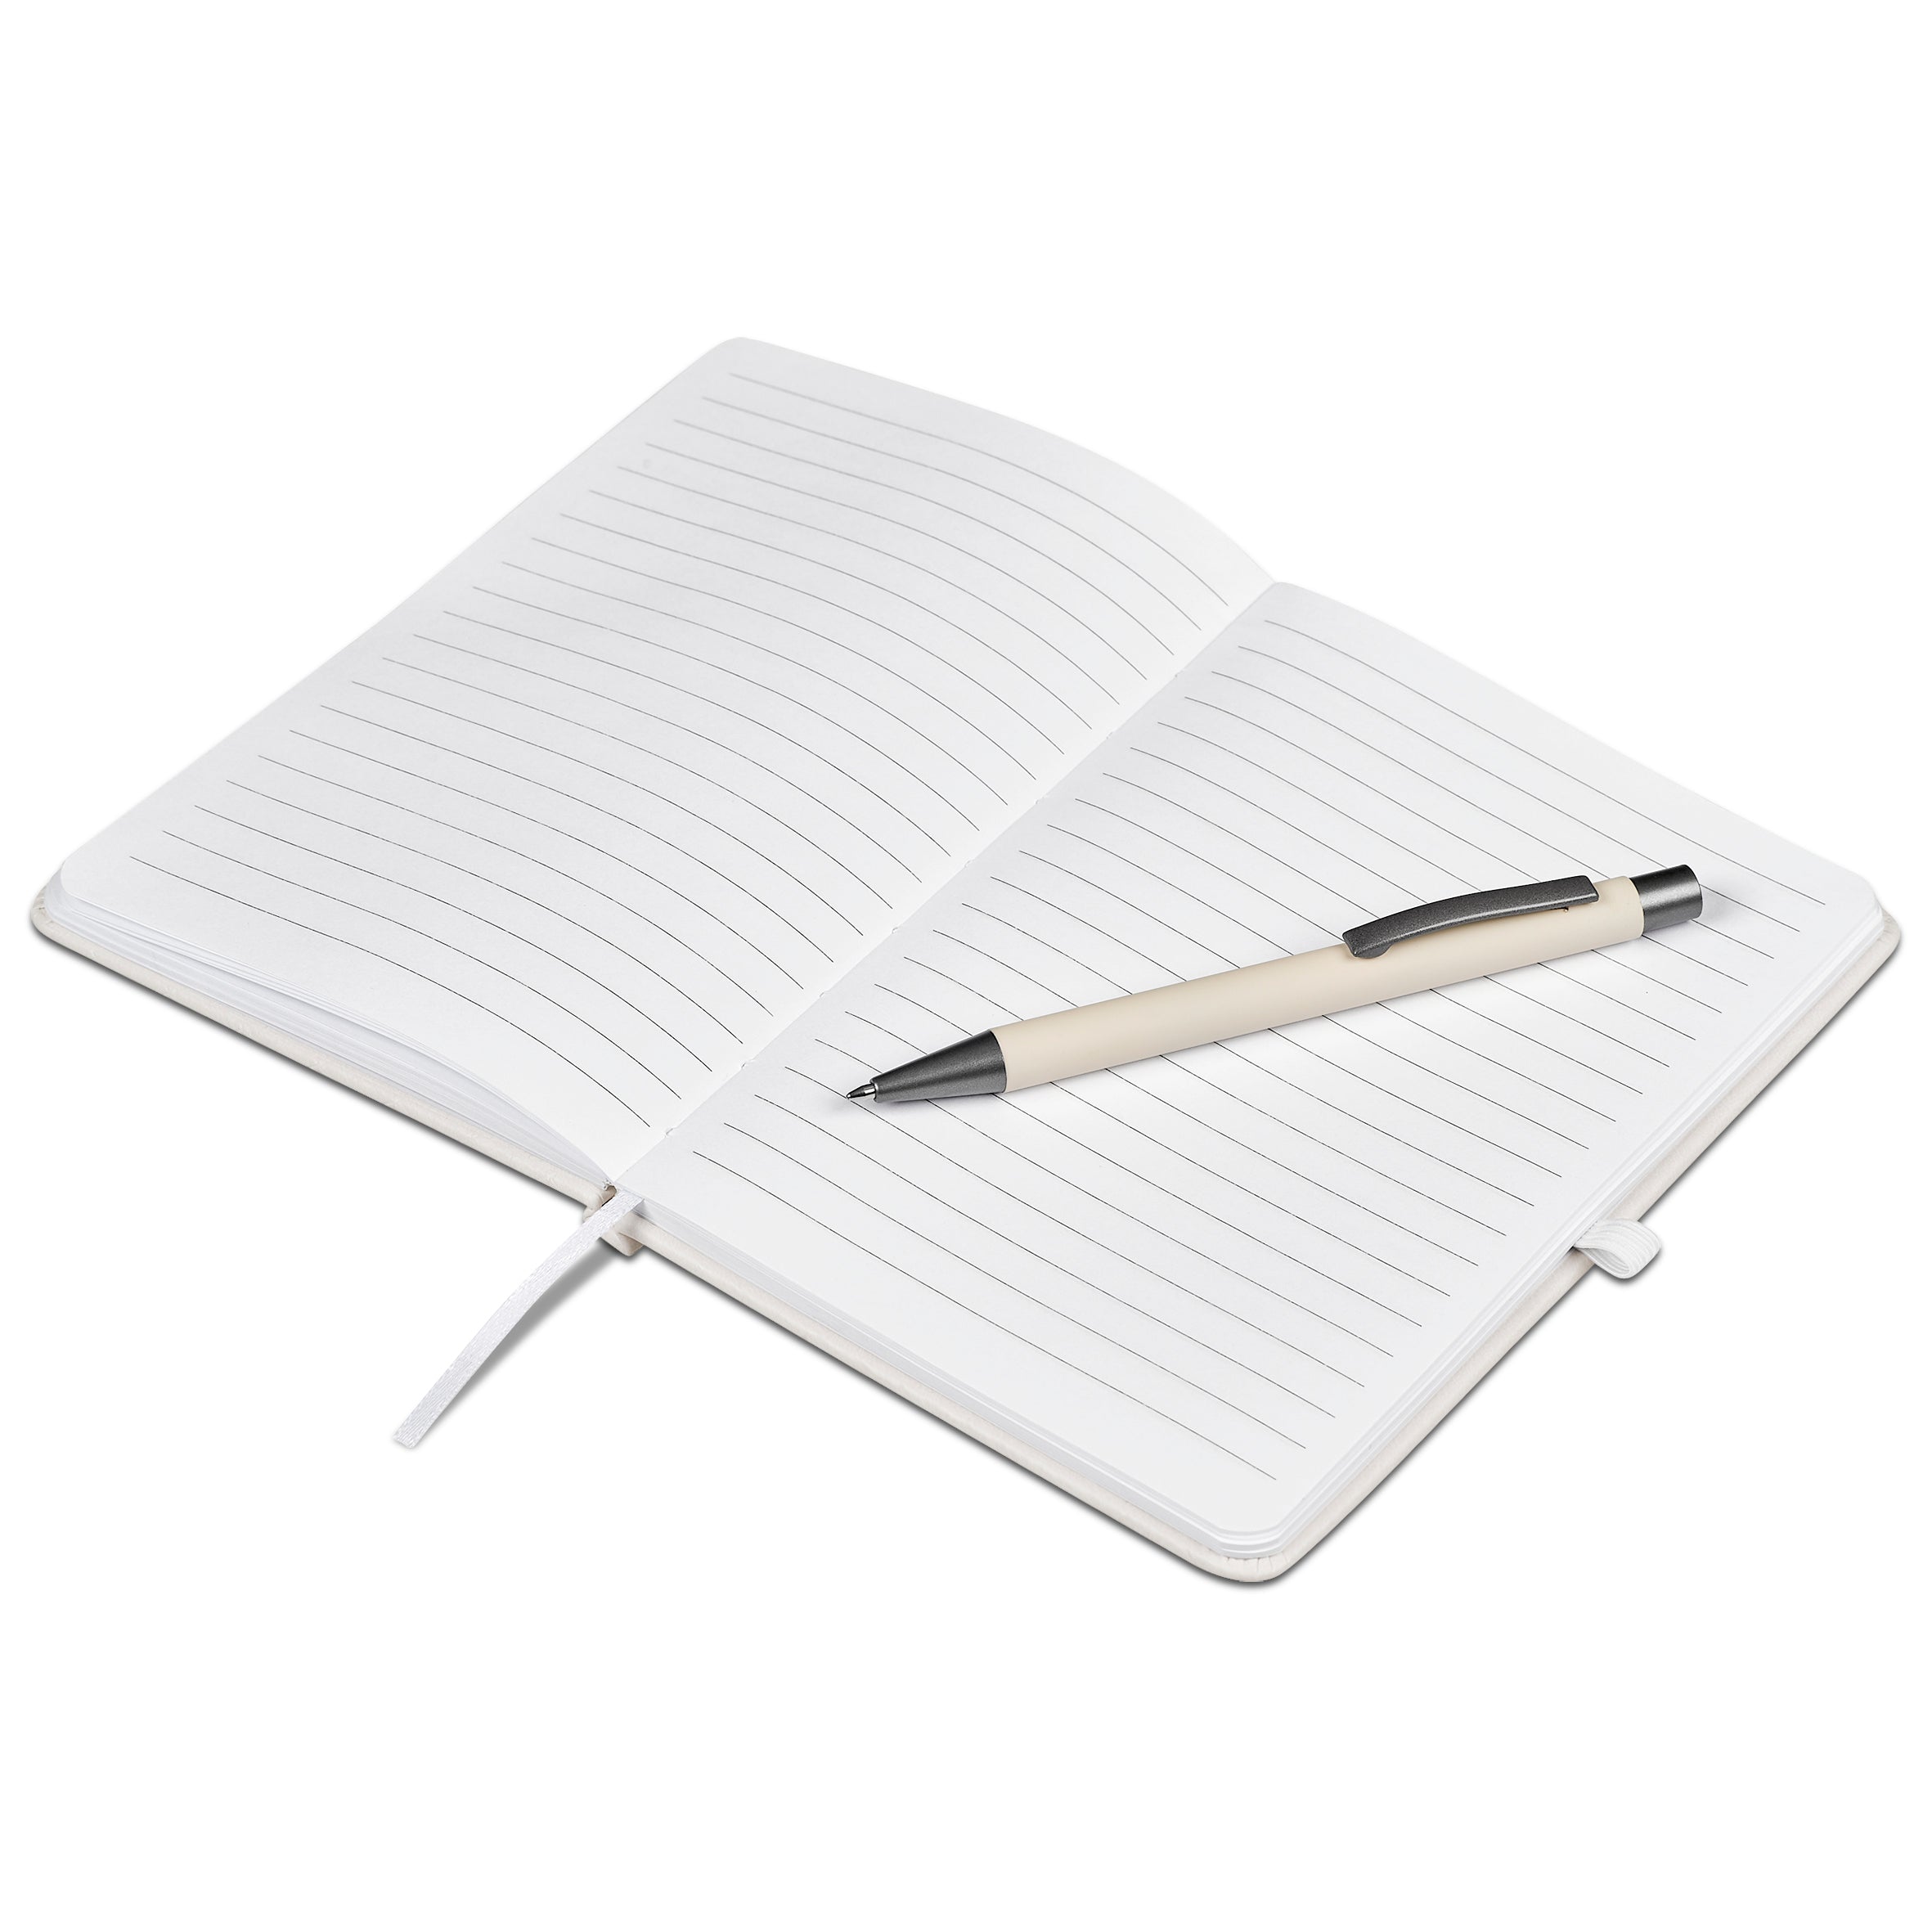 Cameo Midi Hard Cover Notebook - Notebooks & Notepads